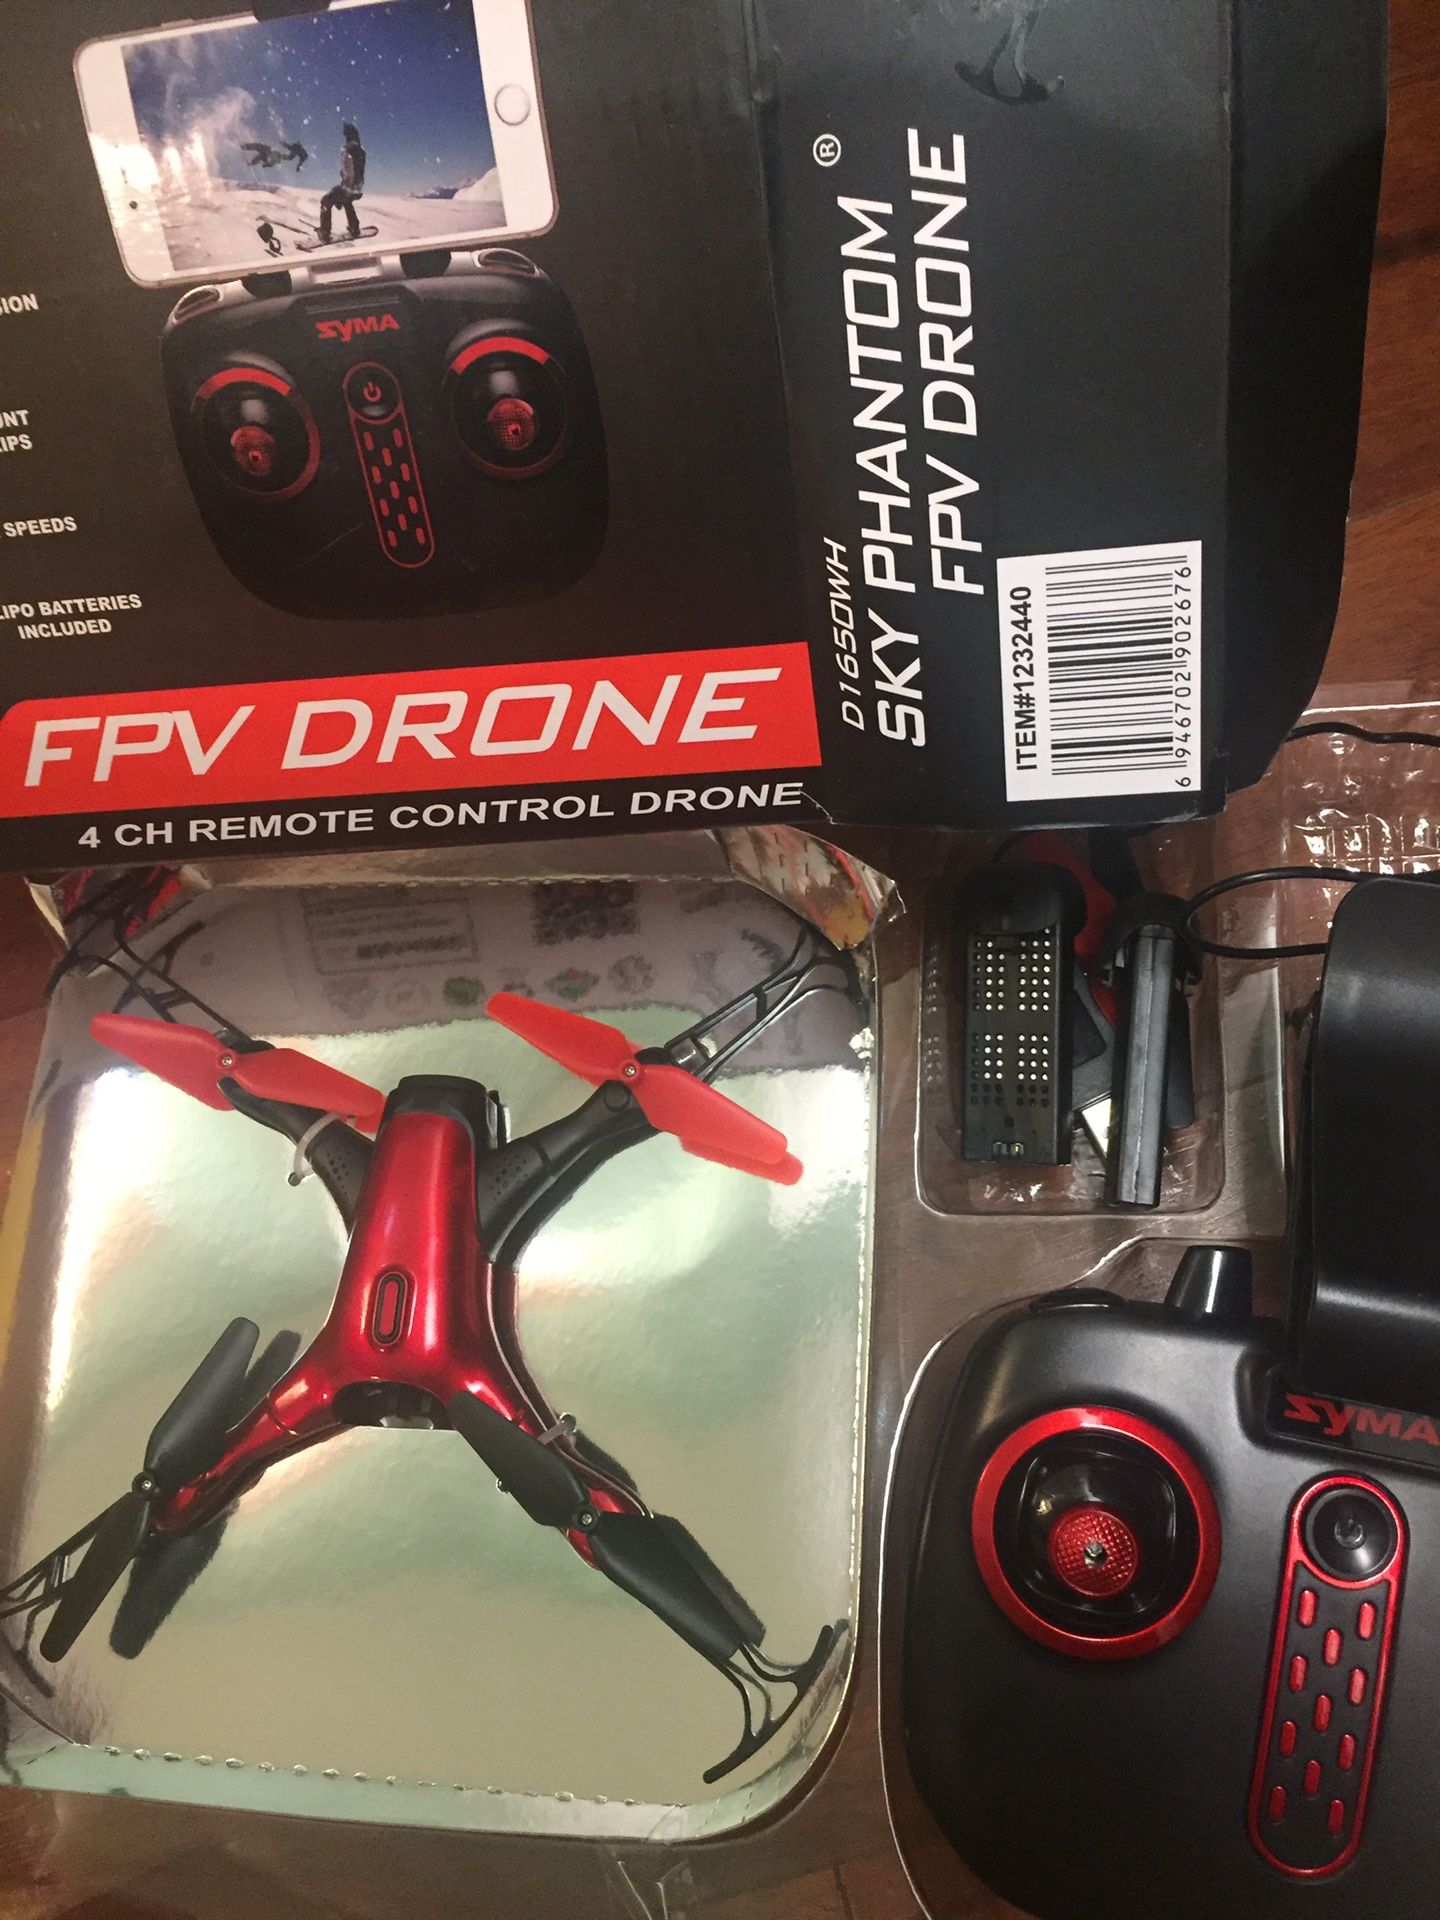 Drone. New in box, never used. SYMA d1650wh